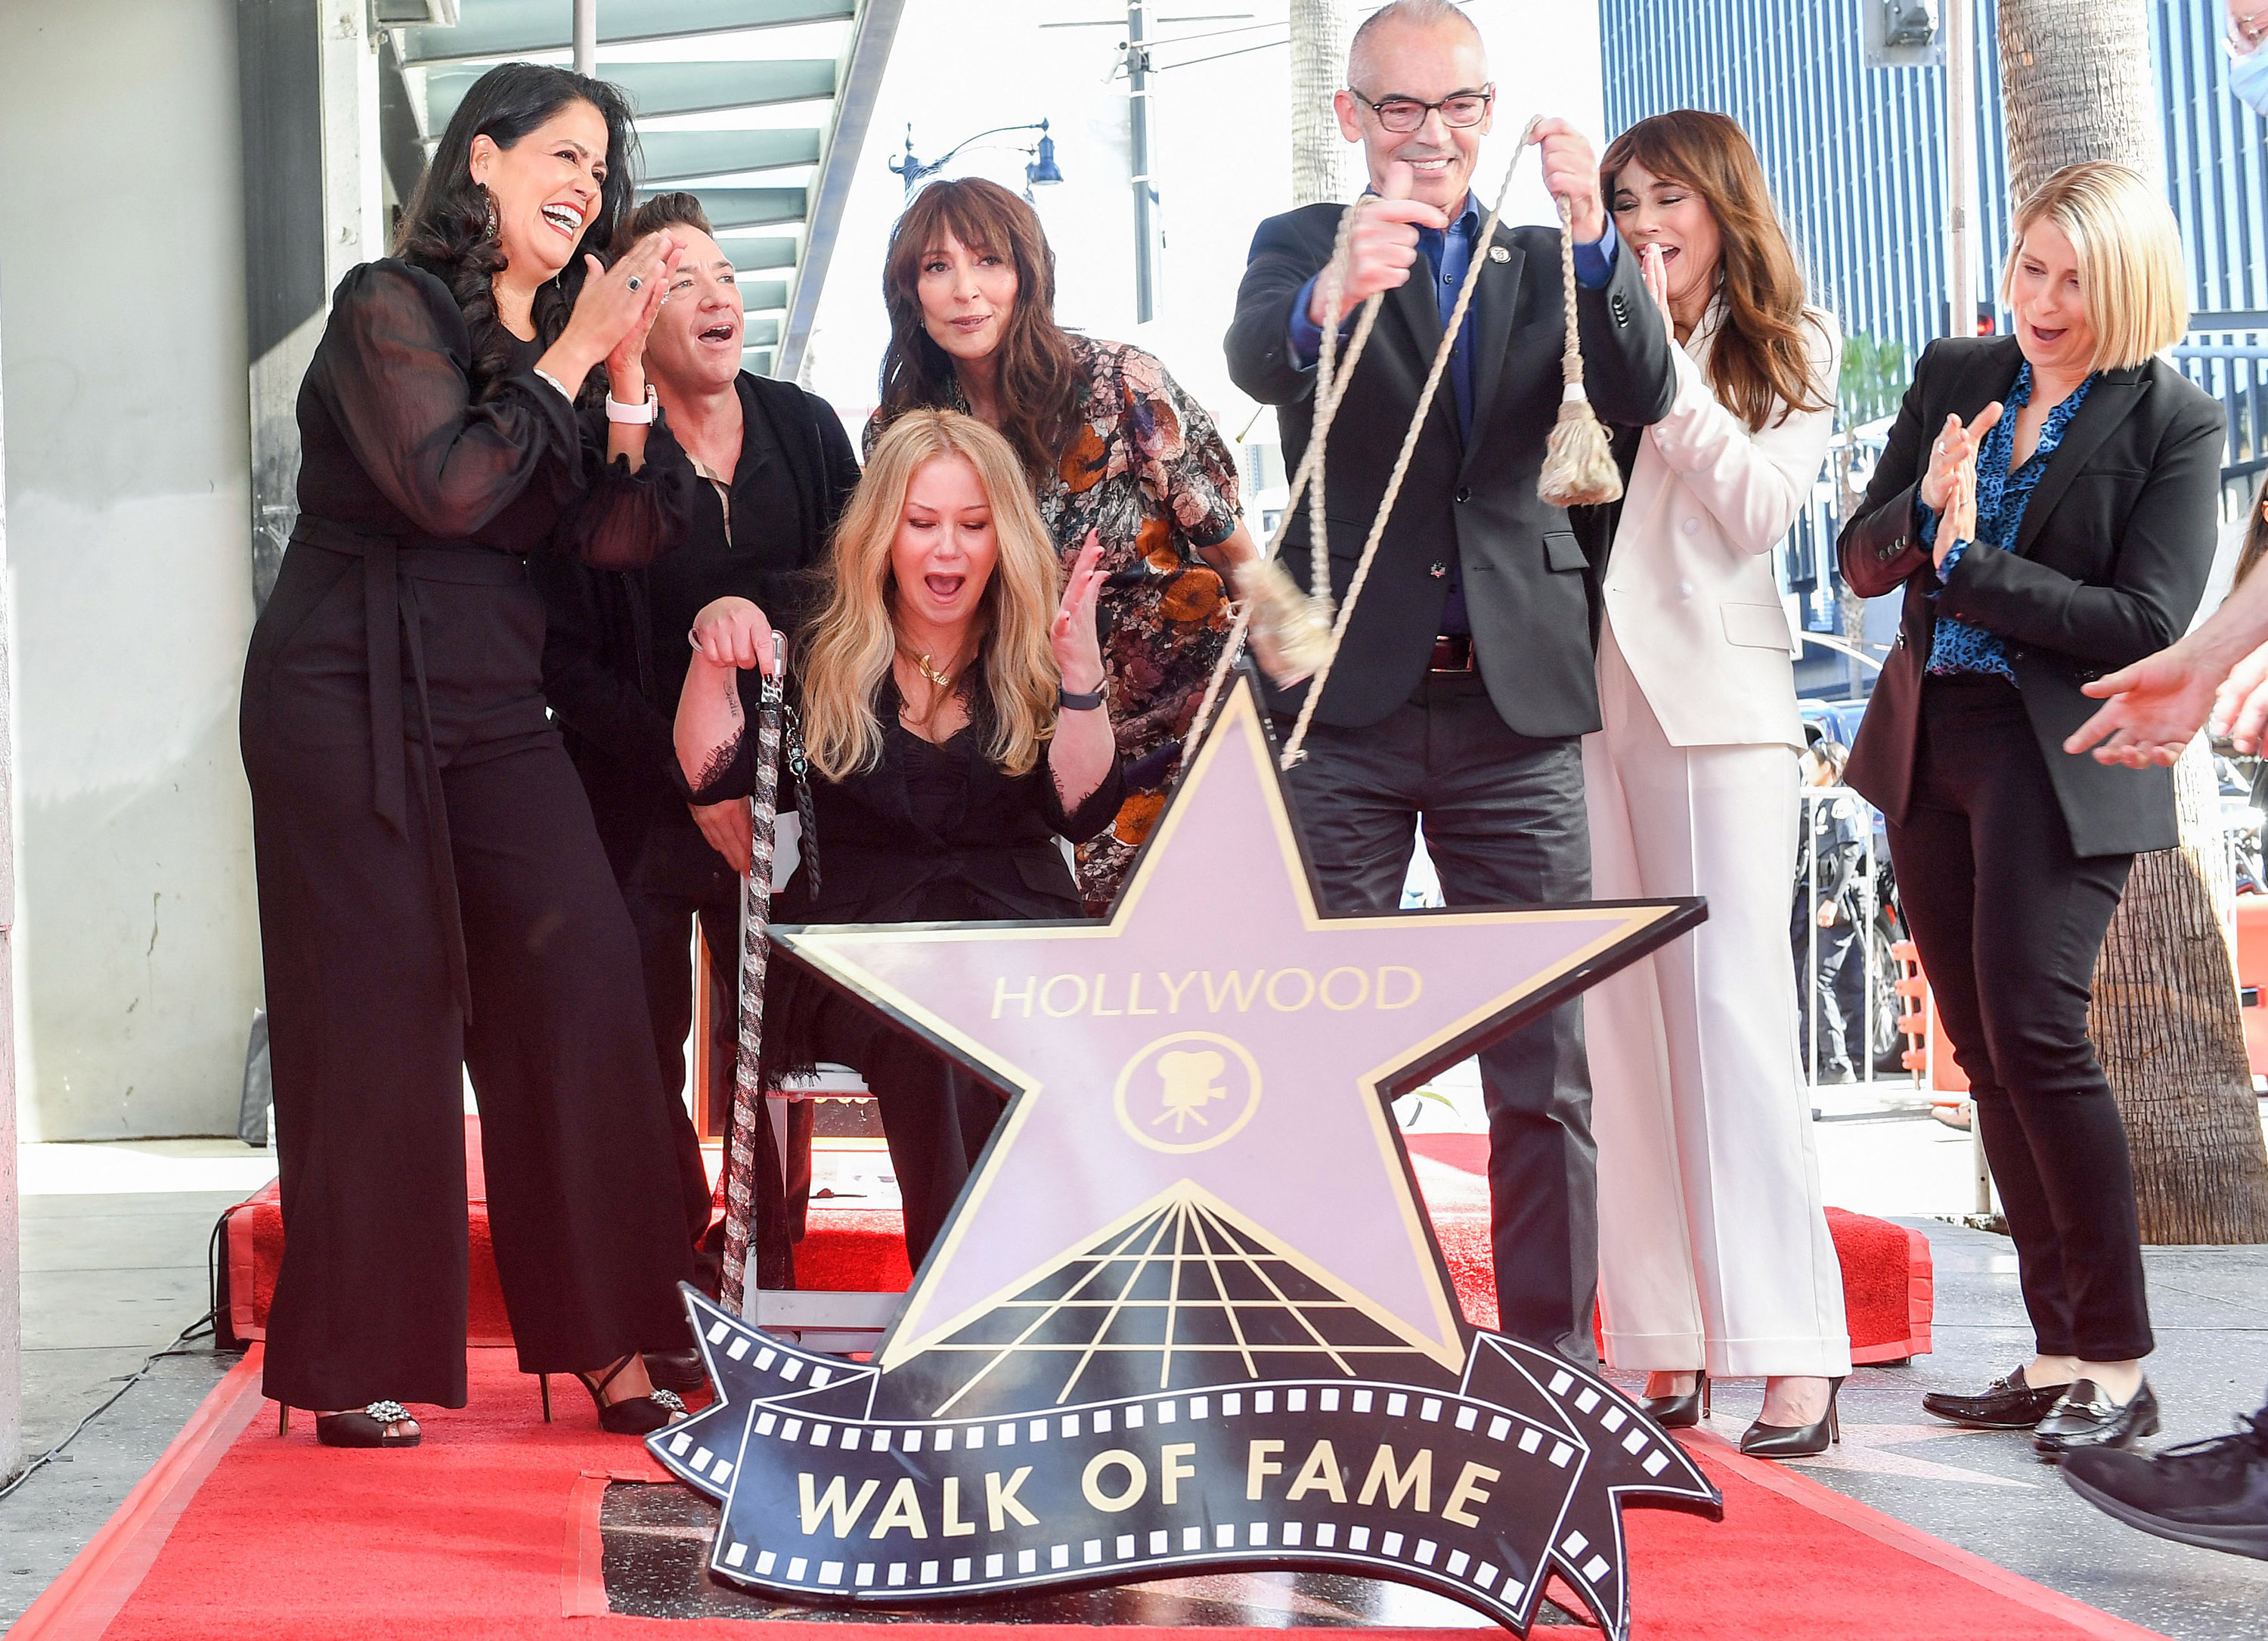 (L-R) Chair of the Hollywood Chamber of Commerce Lupita Sanchez Cornejo, actor David Faustino, actress Christina Applegate, actress Katey Sagal, Los Angeles City Council member Mitch O'Farrell, actress Linda Cardellini and comedian Liz Feldman pose for photos with Applegate's newly unveiled Hollywood Walk of Fame star in Hollywood, Calif. on Nov. 14, 2022.